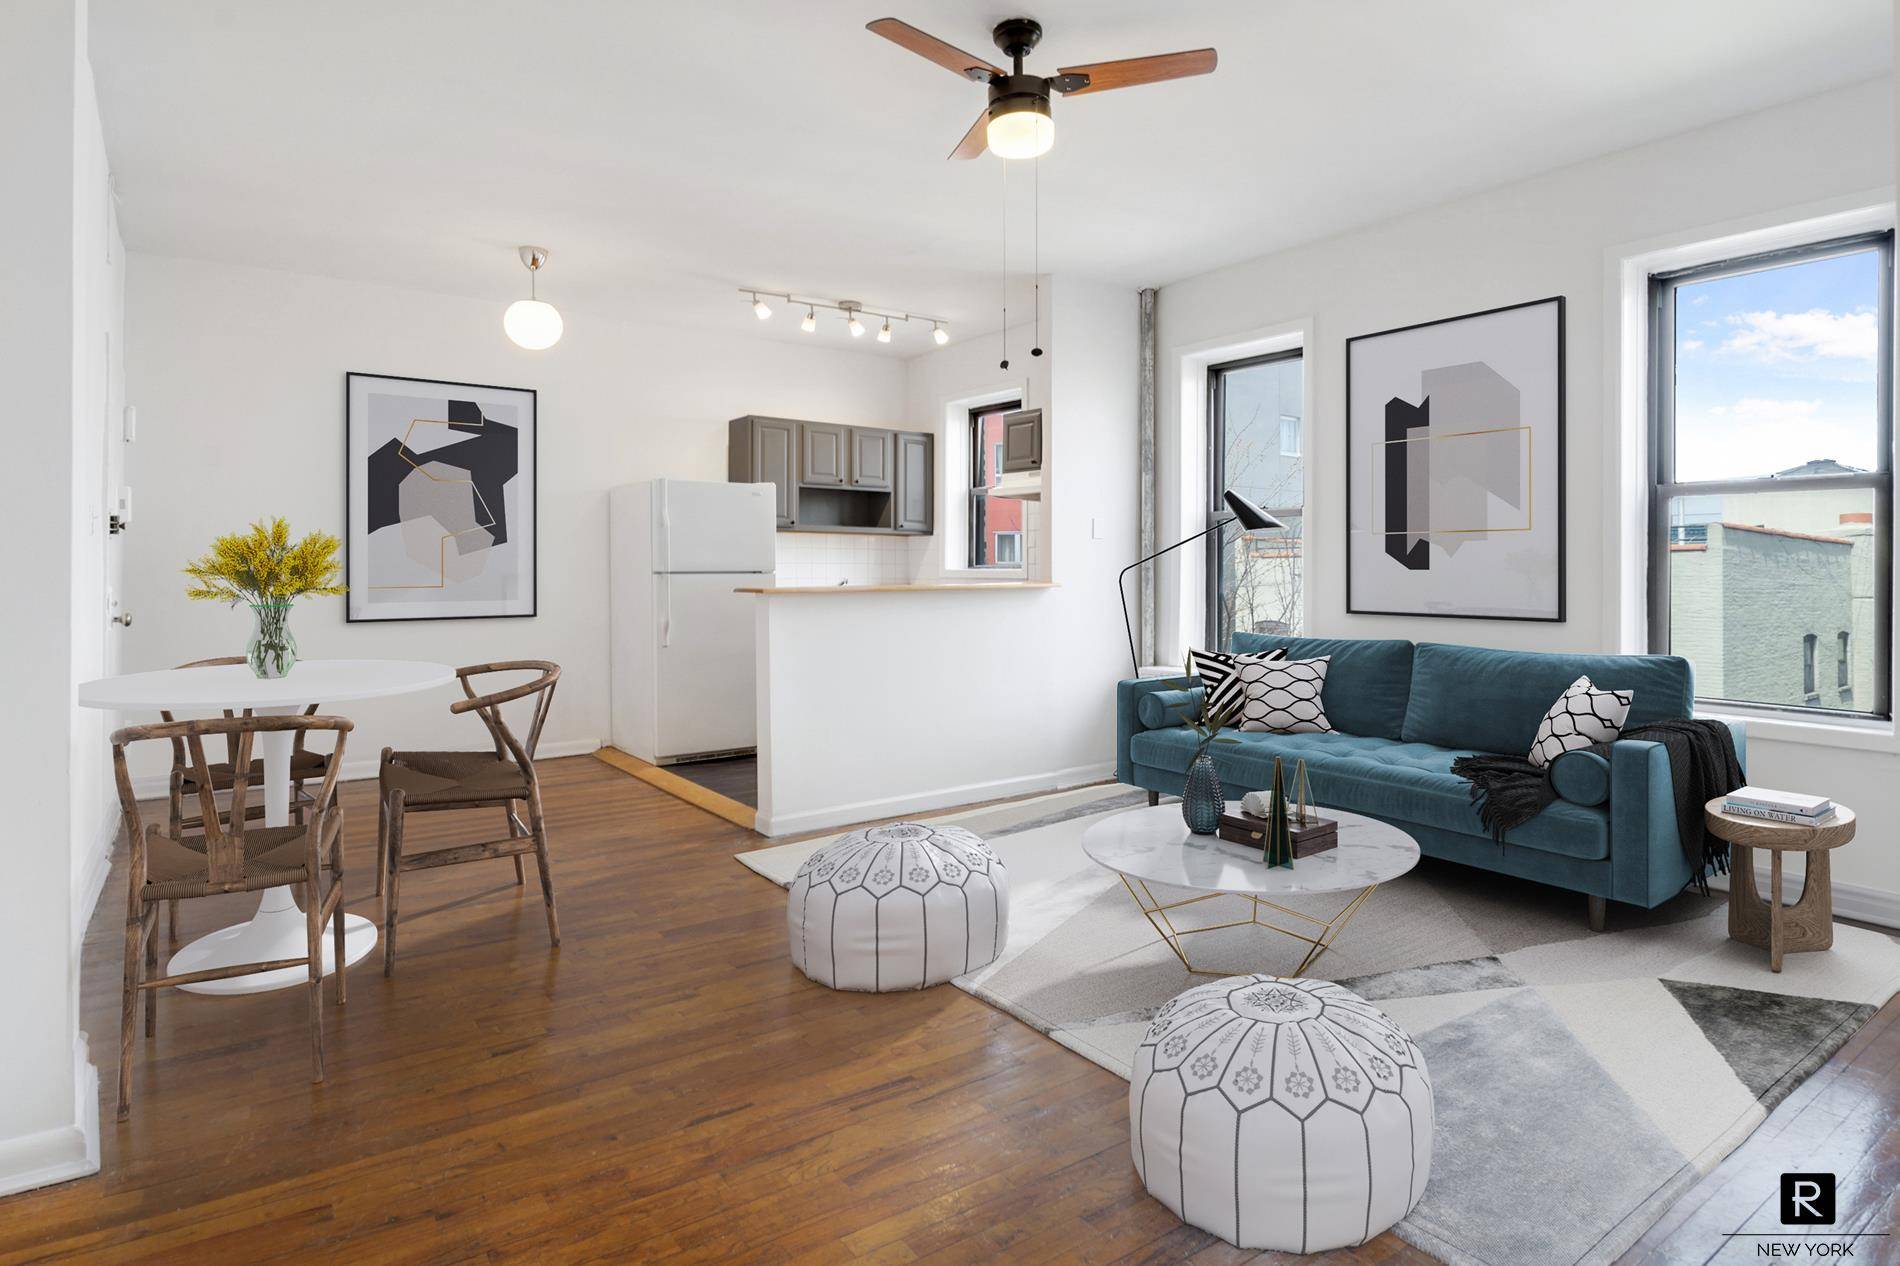 Just 10 down payment ! for this bright and airy one bedroom at the intersection of Prospect Heights and Crown Heights.